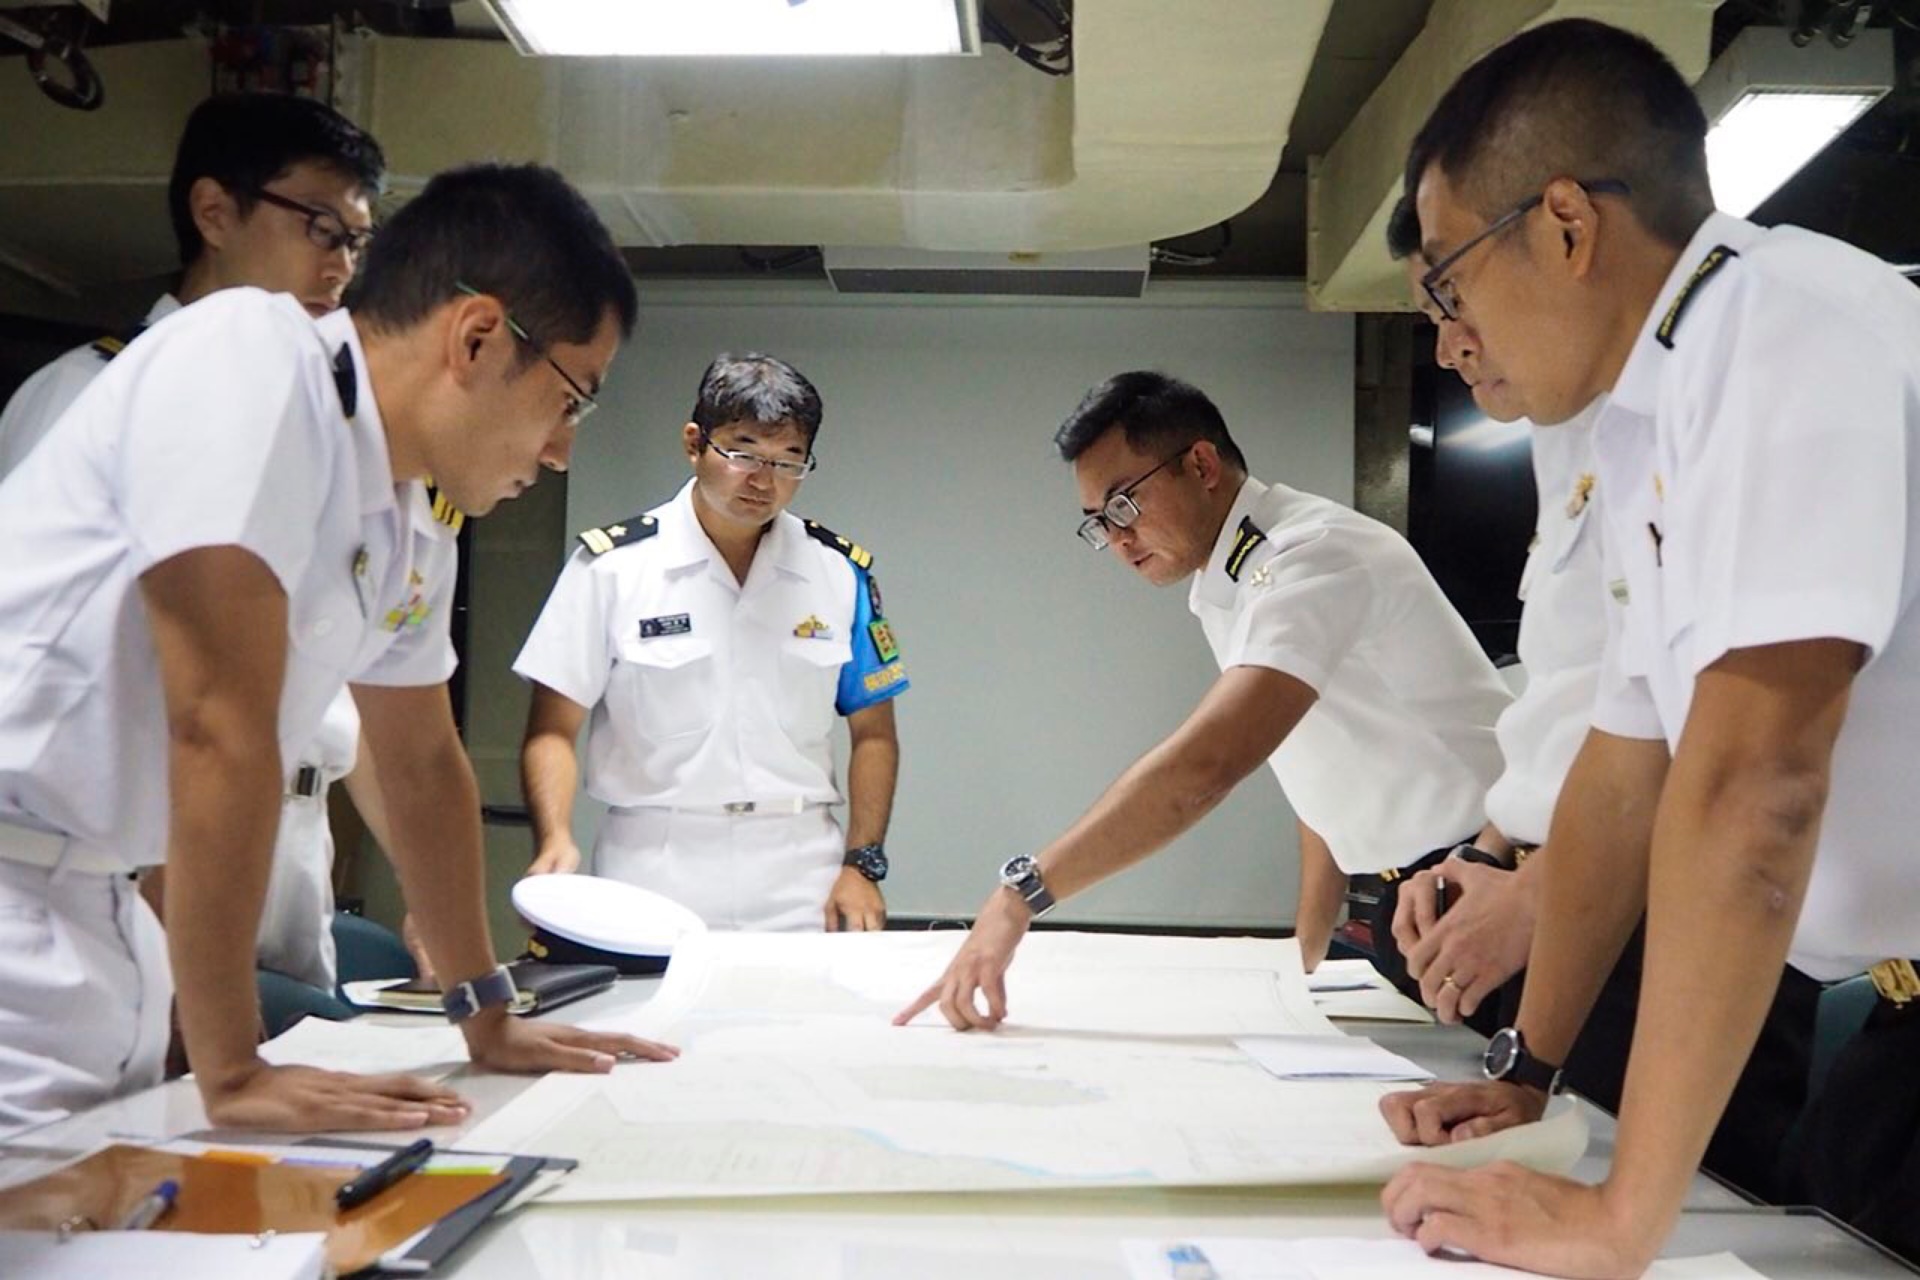 Republic of Singapore Navy (RSN) and Japan Maritime Self-Defense Force (JMSDF) personnel planning for the passage exercise on board RSS Tenacious.